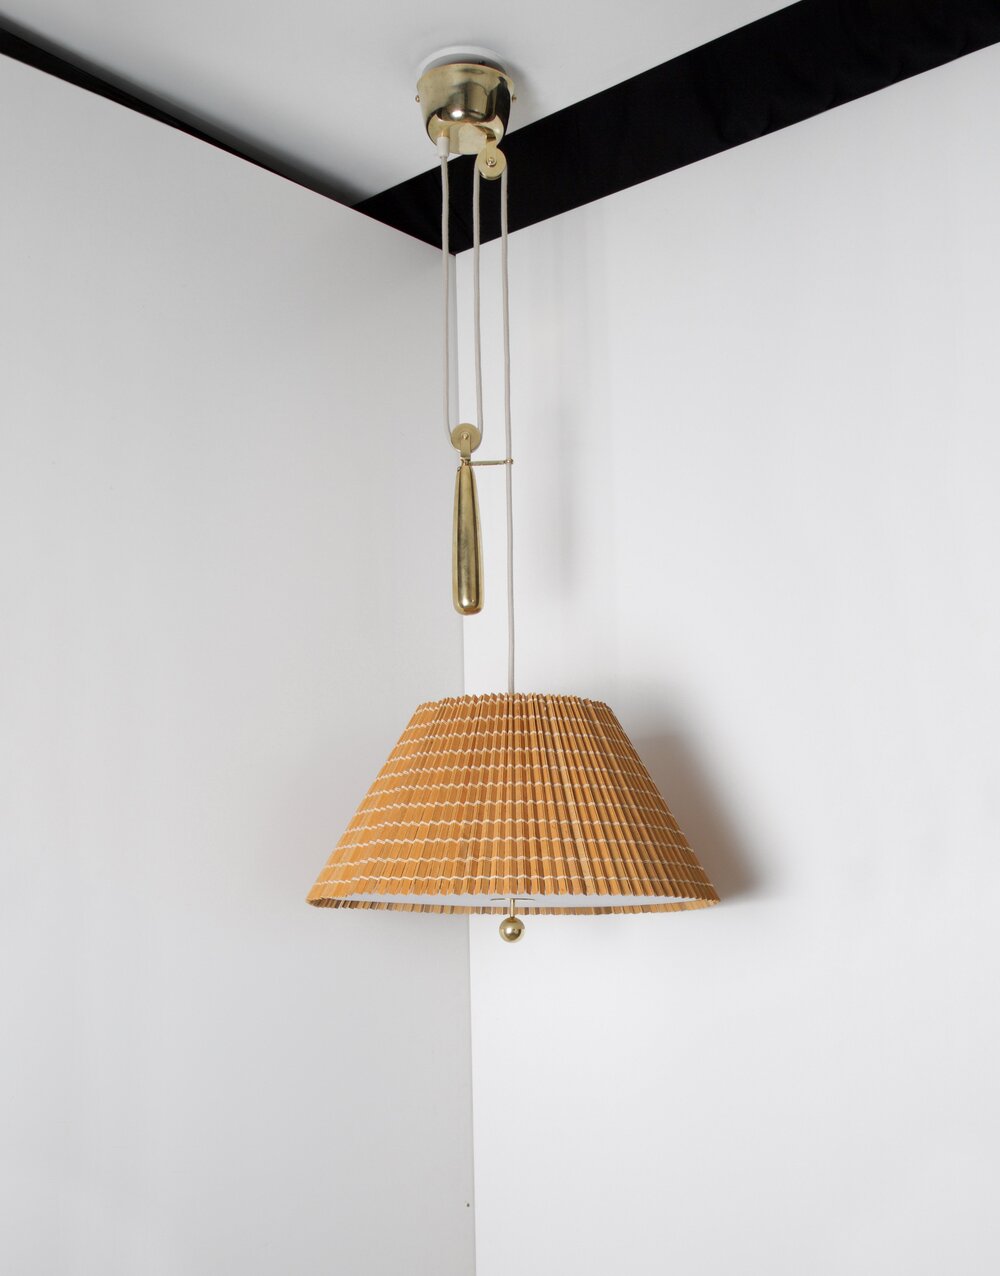 Unødvendig tusind nikotin Paavo Tynell Counter Balance Ceiling Light with Wicker Shade Model 1968 —  The Exchange Int